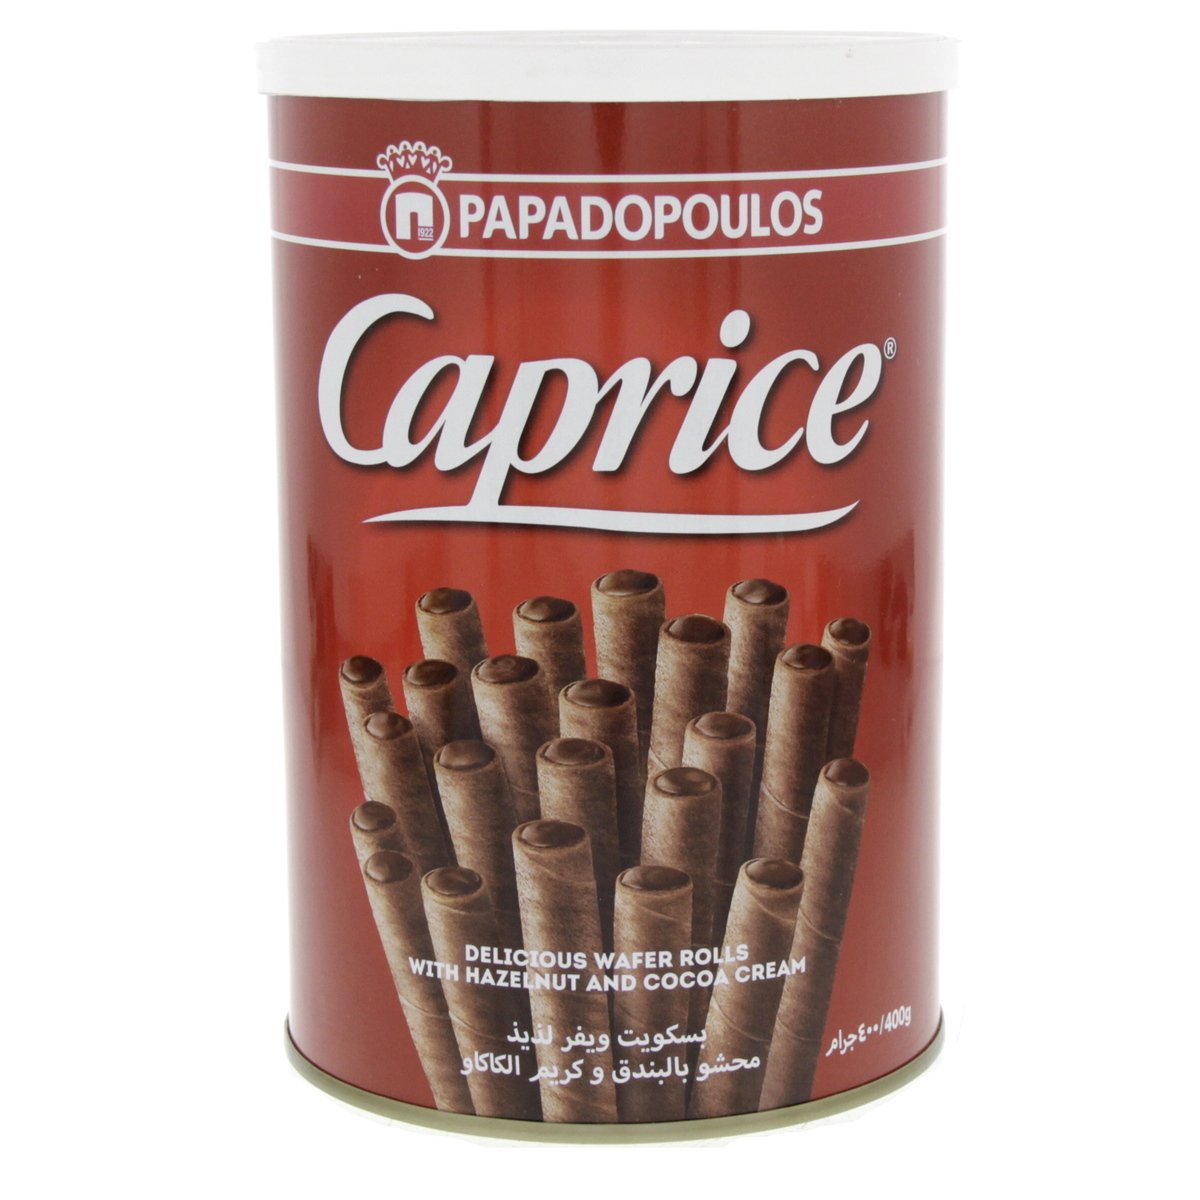 Papadopoulos Caprice Wafer Rolls Hazelnut And Cocoa Cream 400 g